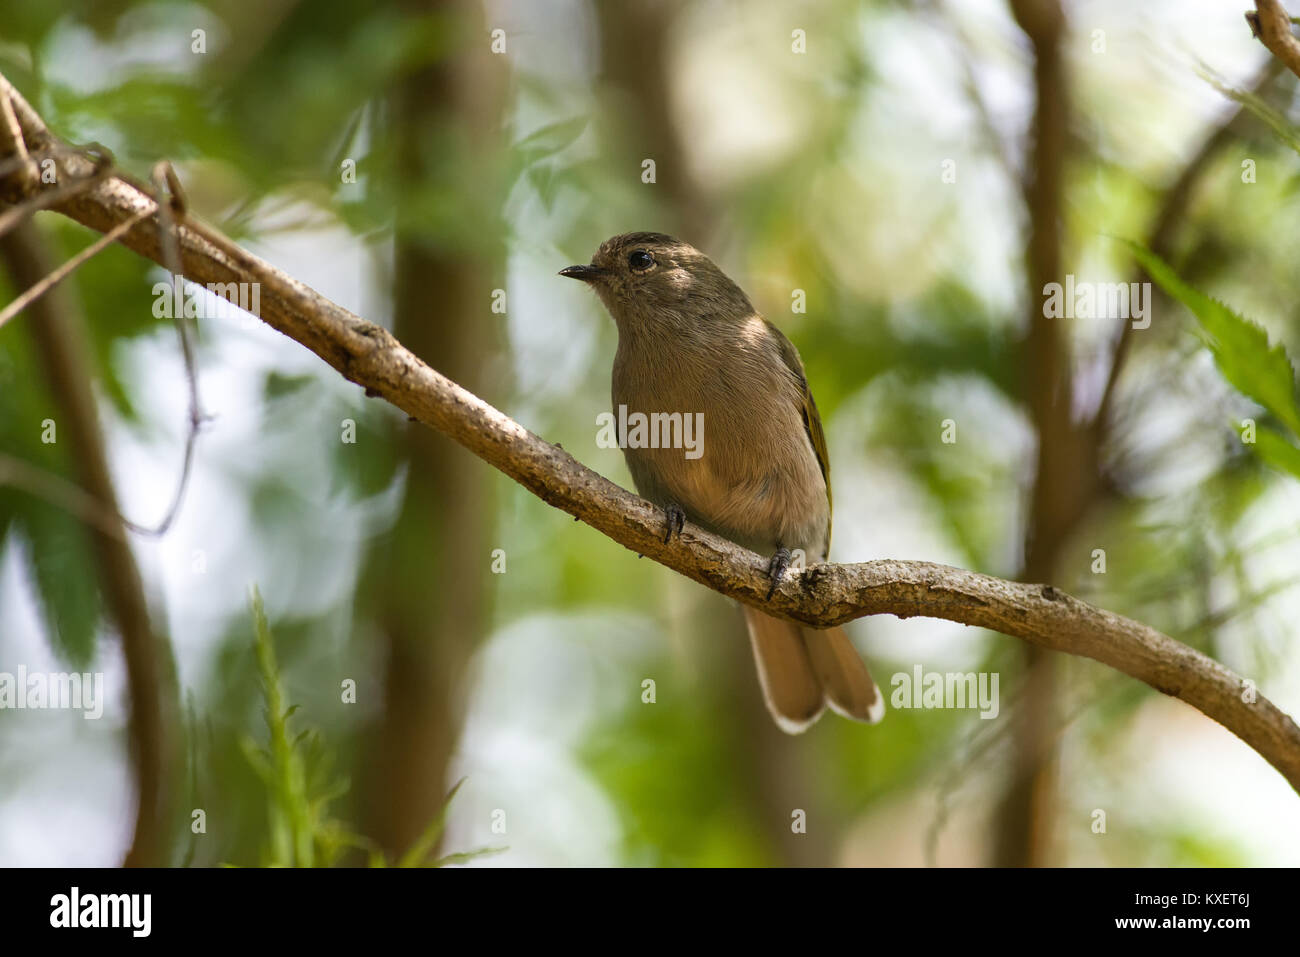 Eastern Green-backed Honeyguide or Honeybird (Prodotiscus zambesiae) perched on a branch in the shade, Nairobi, Kenya, East Africa Stock Photo